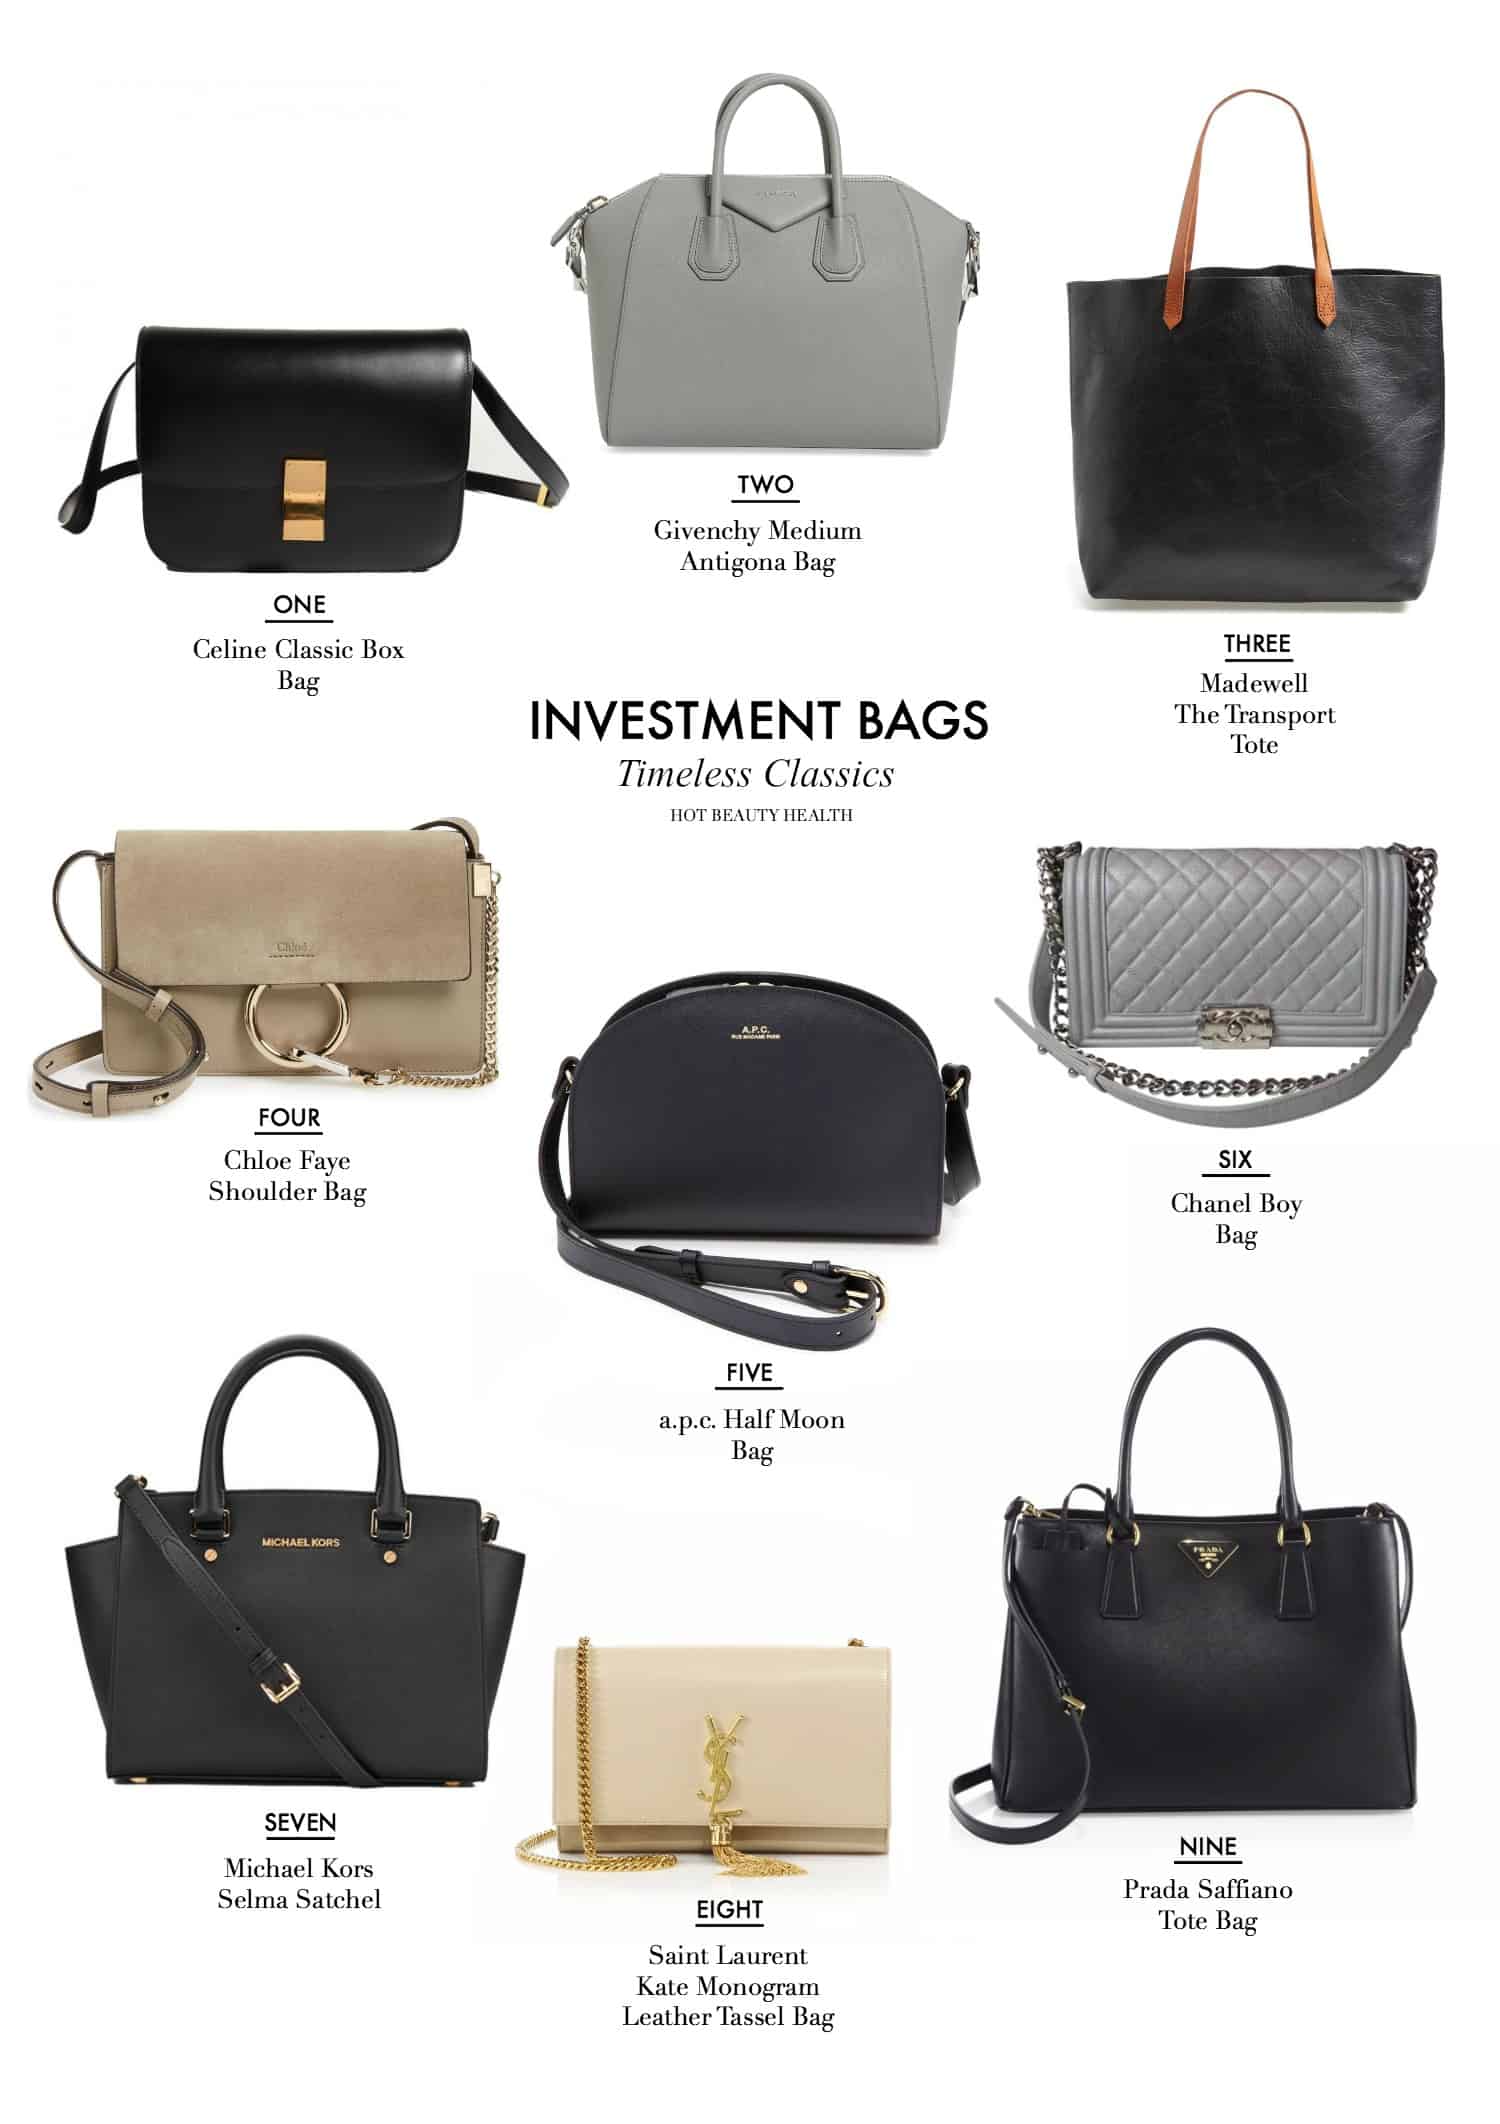 9 Classic Handbags That Are Worth The Investment - Hot Beauty Health